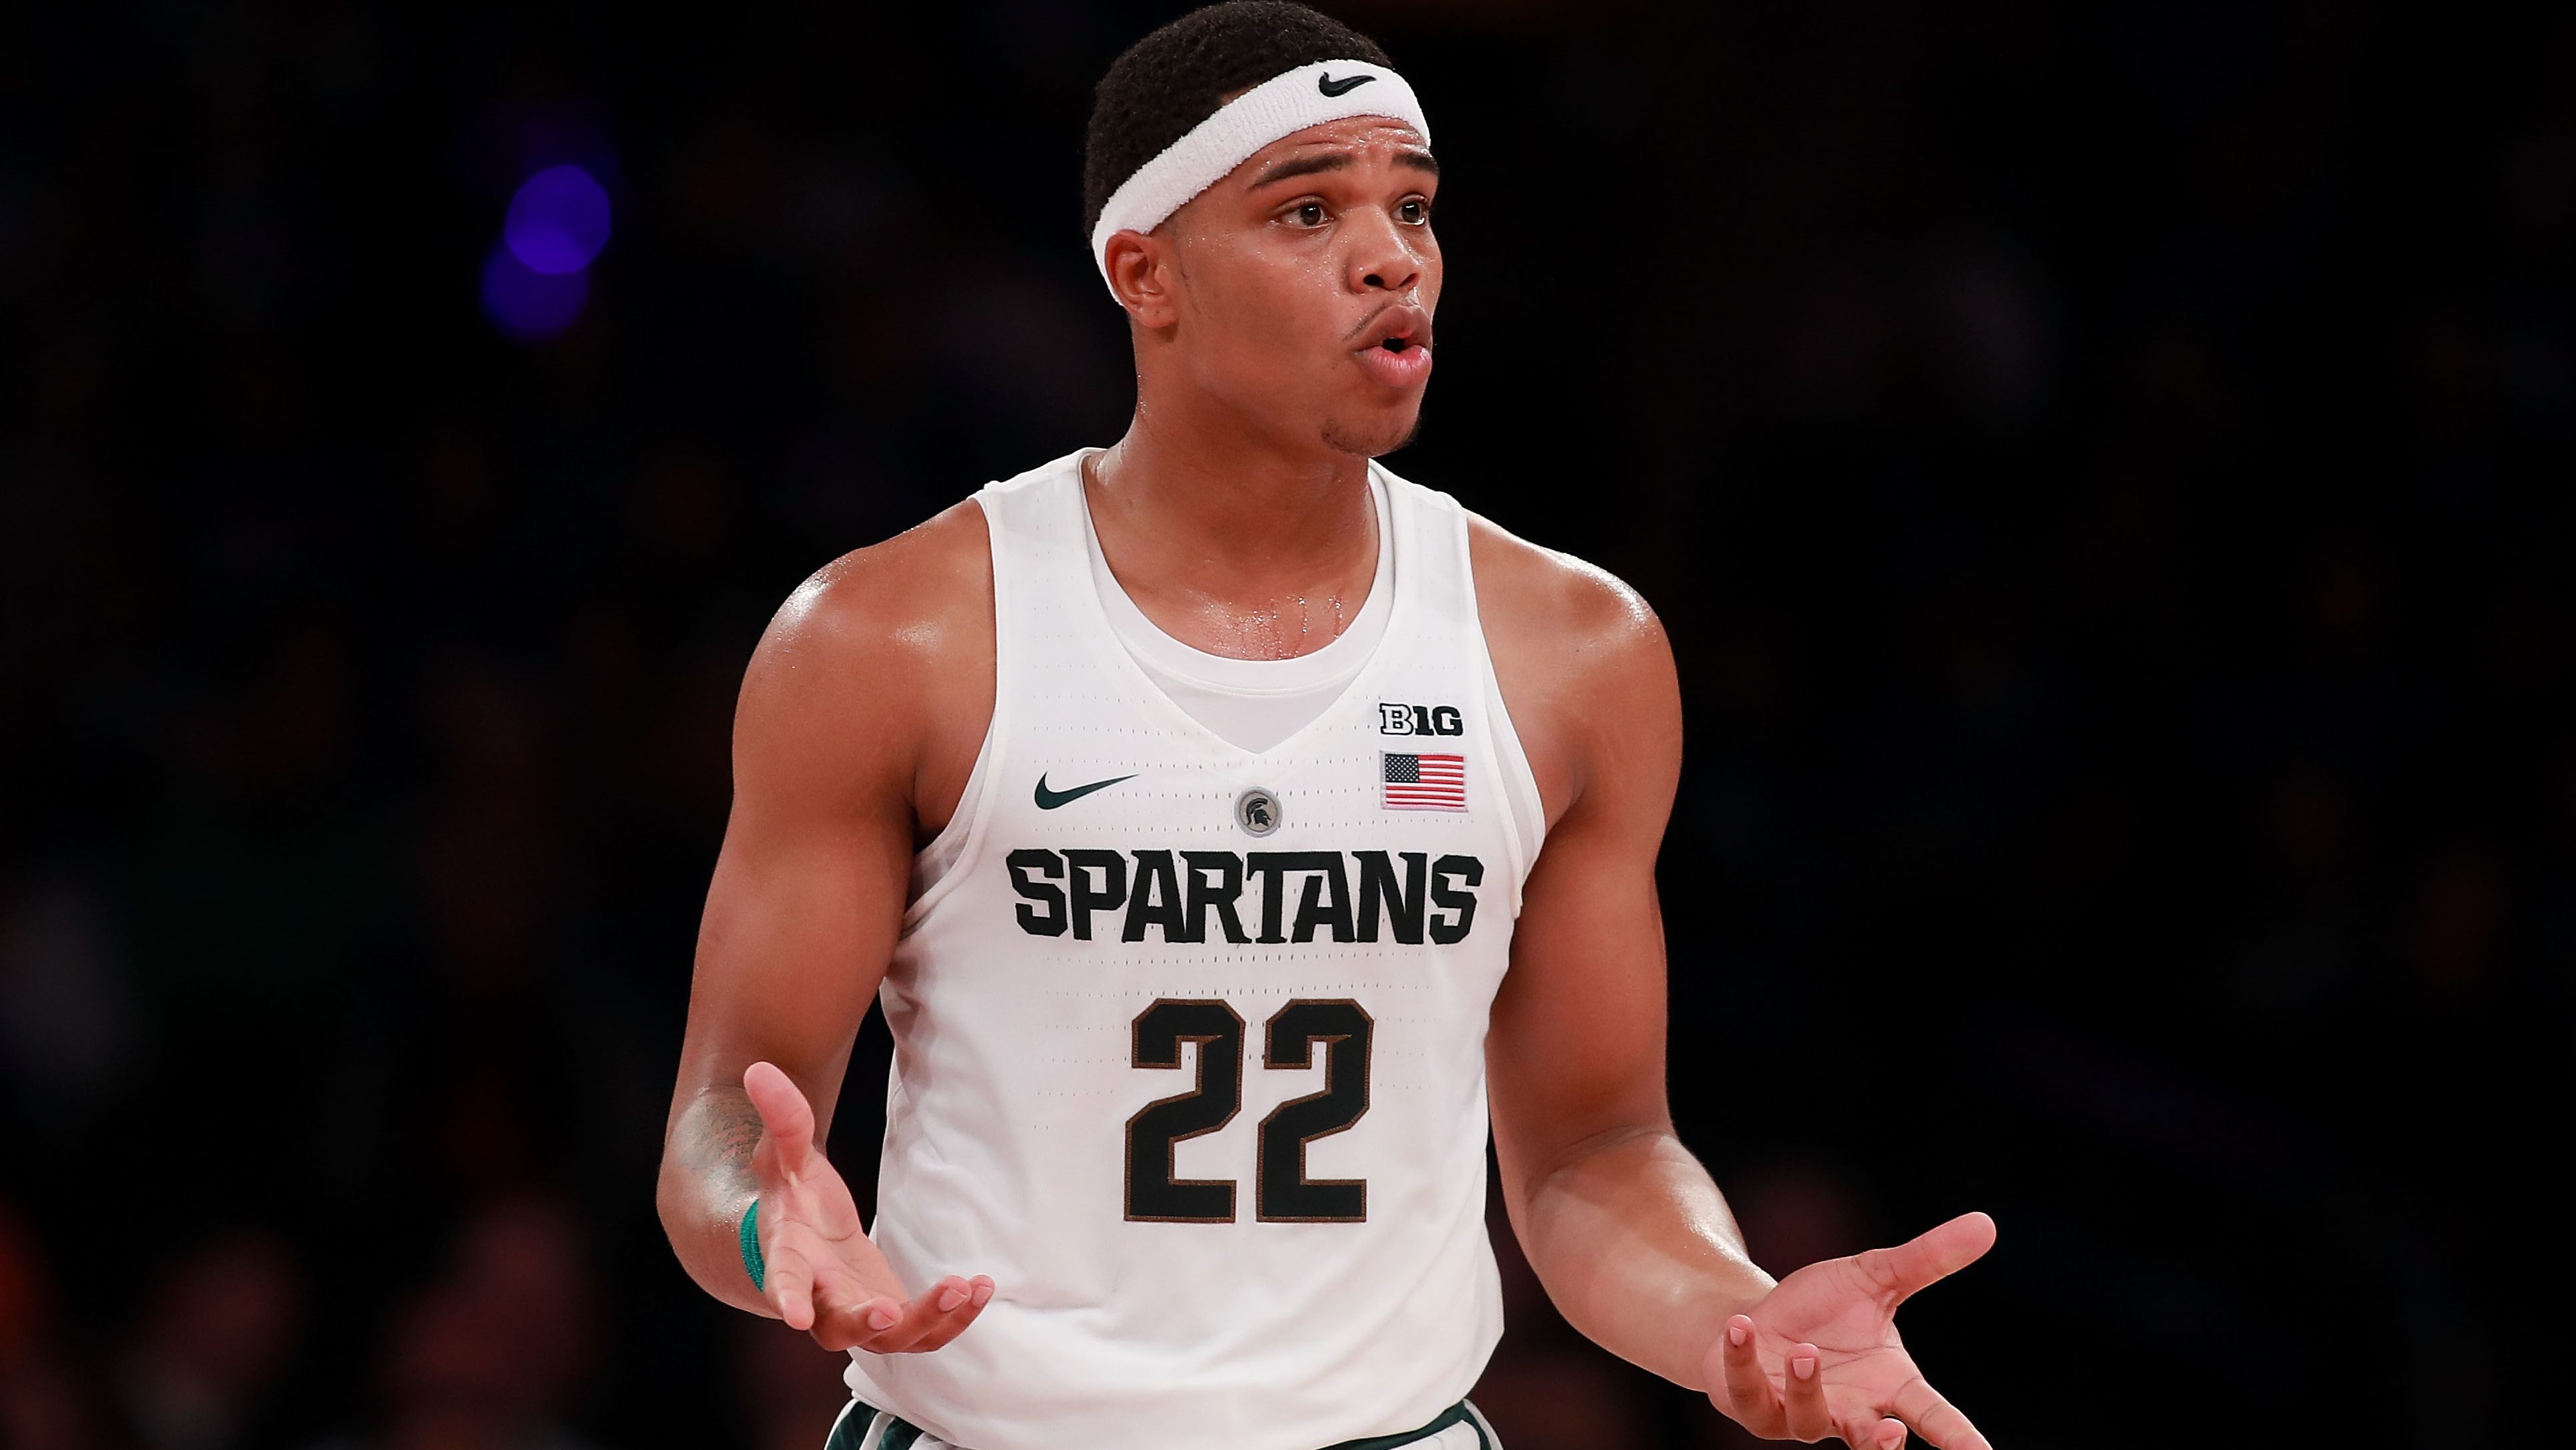 NEW YORK, NY - NOVEMBER 15: Miles Bridges #22 of the Michigan State Spartans reacts against the Kentucky Wildcats in the first half during the State Farm Champions Classic at Madison Square Garden on November 15, 2016 in New York City. (Photo by Michael Reaves/Getty Images)